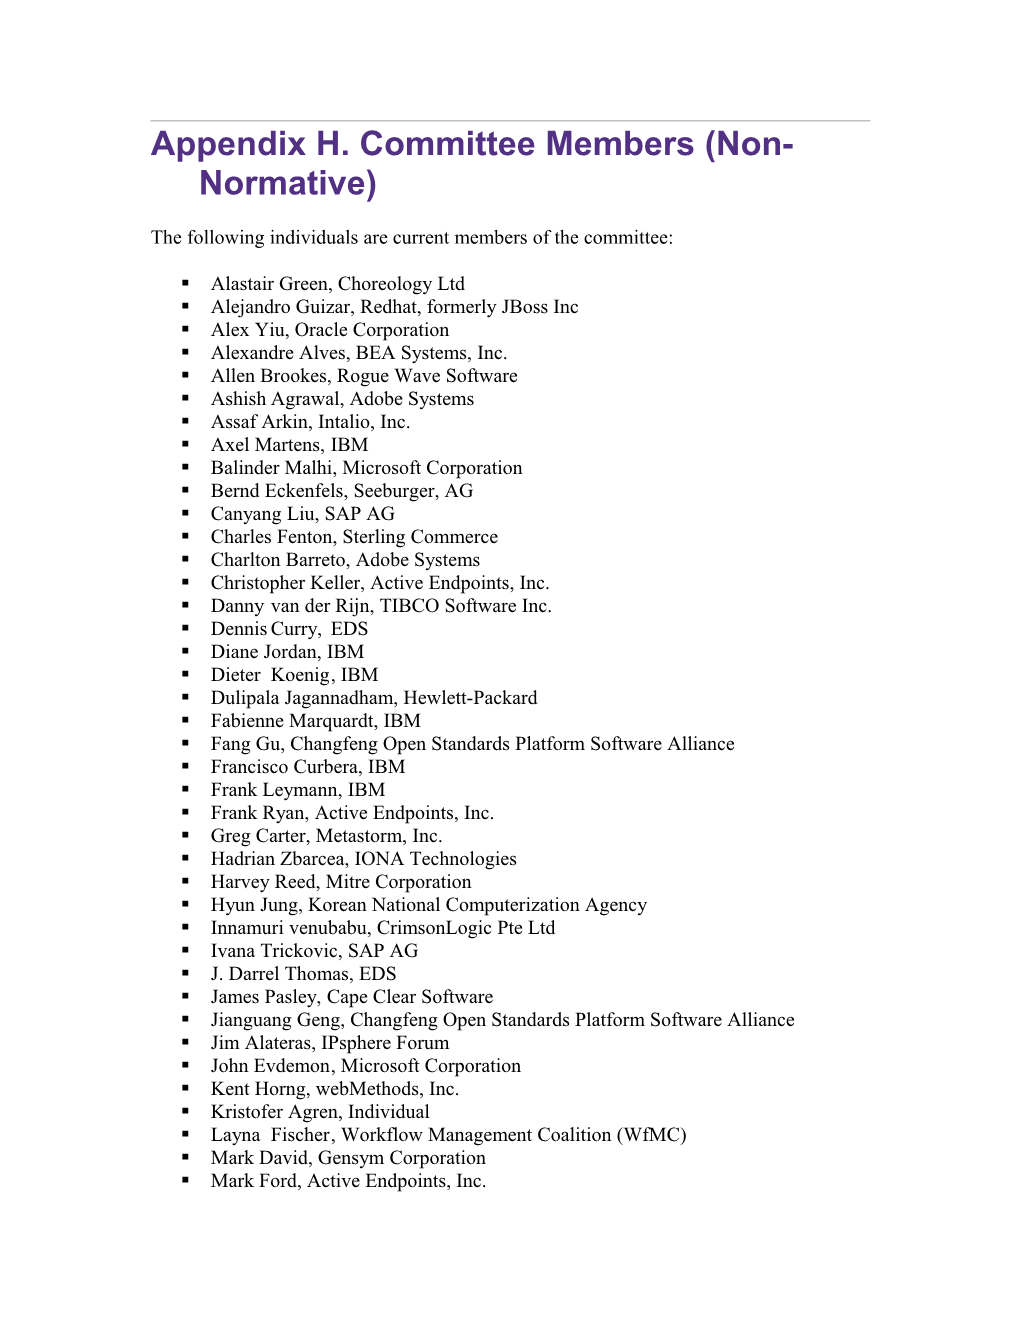 Appendix H. Committee Members (Non-Normative)